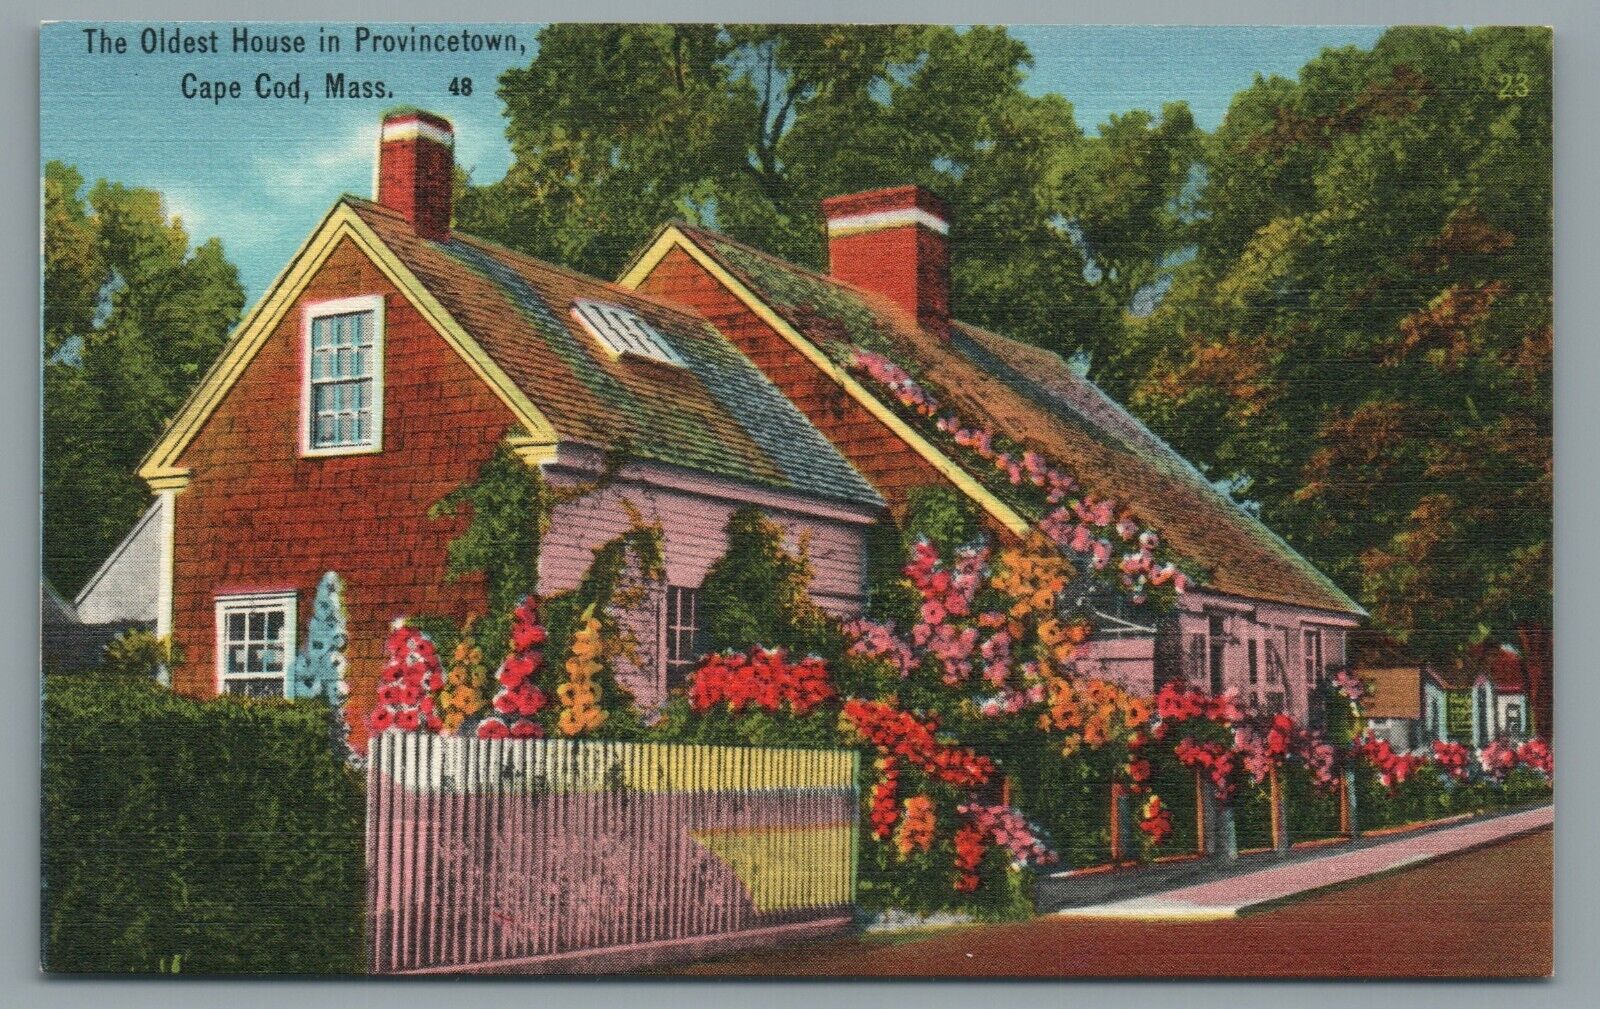 The Oldest House In Provincetown Cape Cod, Massachusetts MA - Vintage Postcard